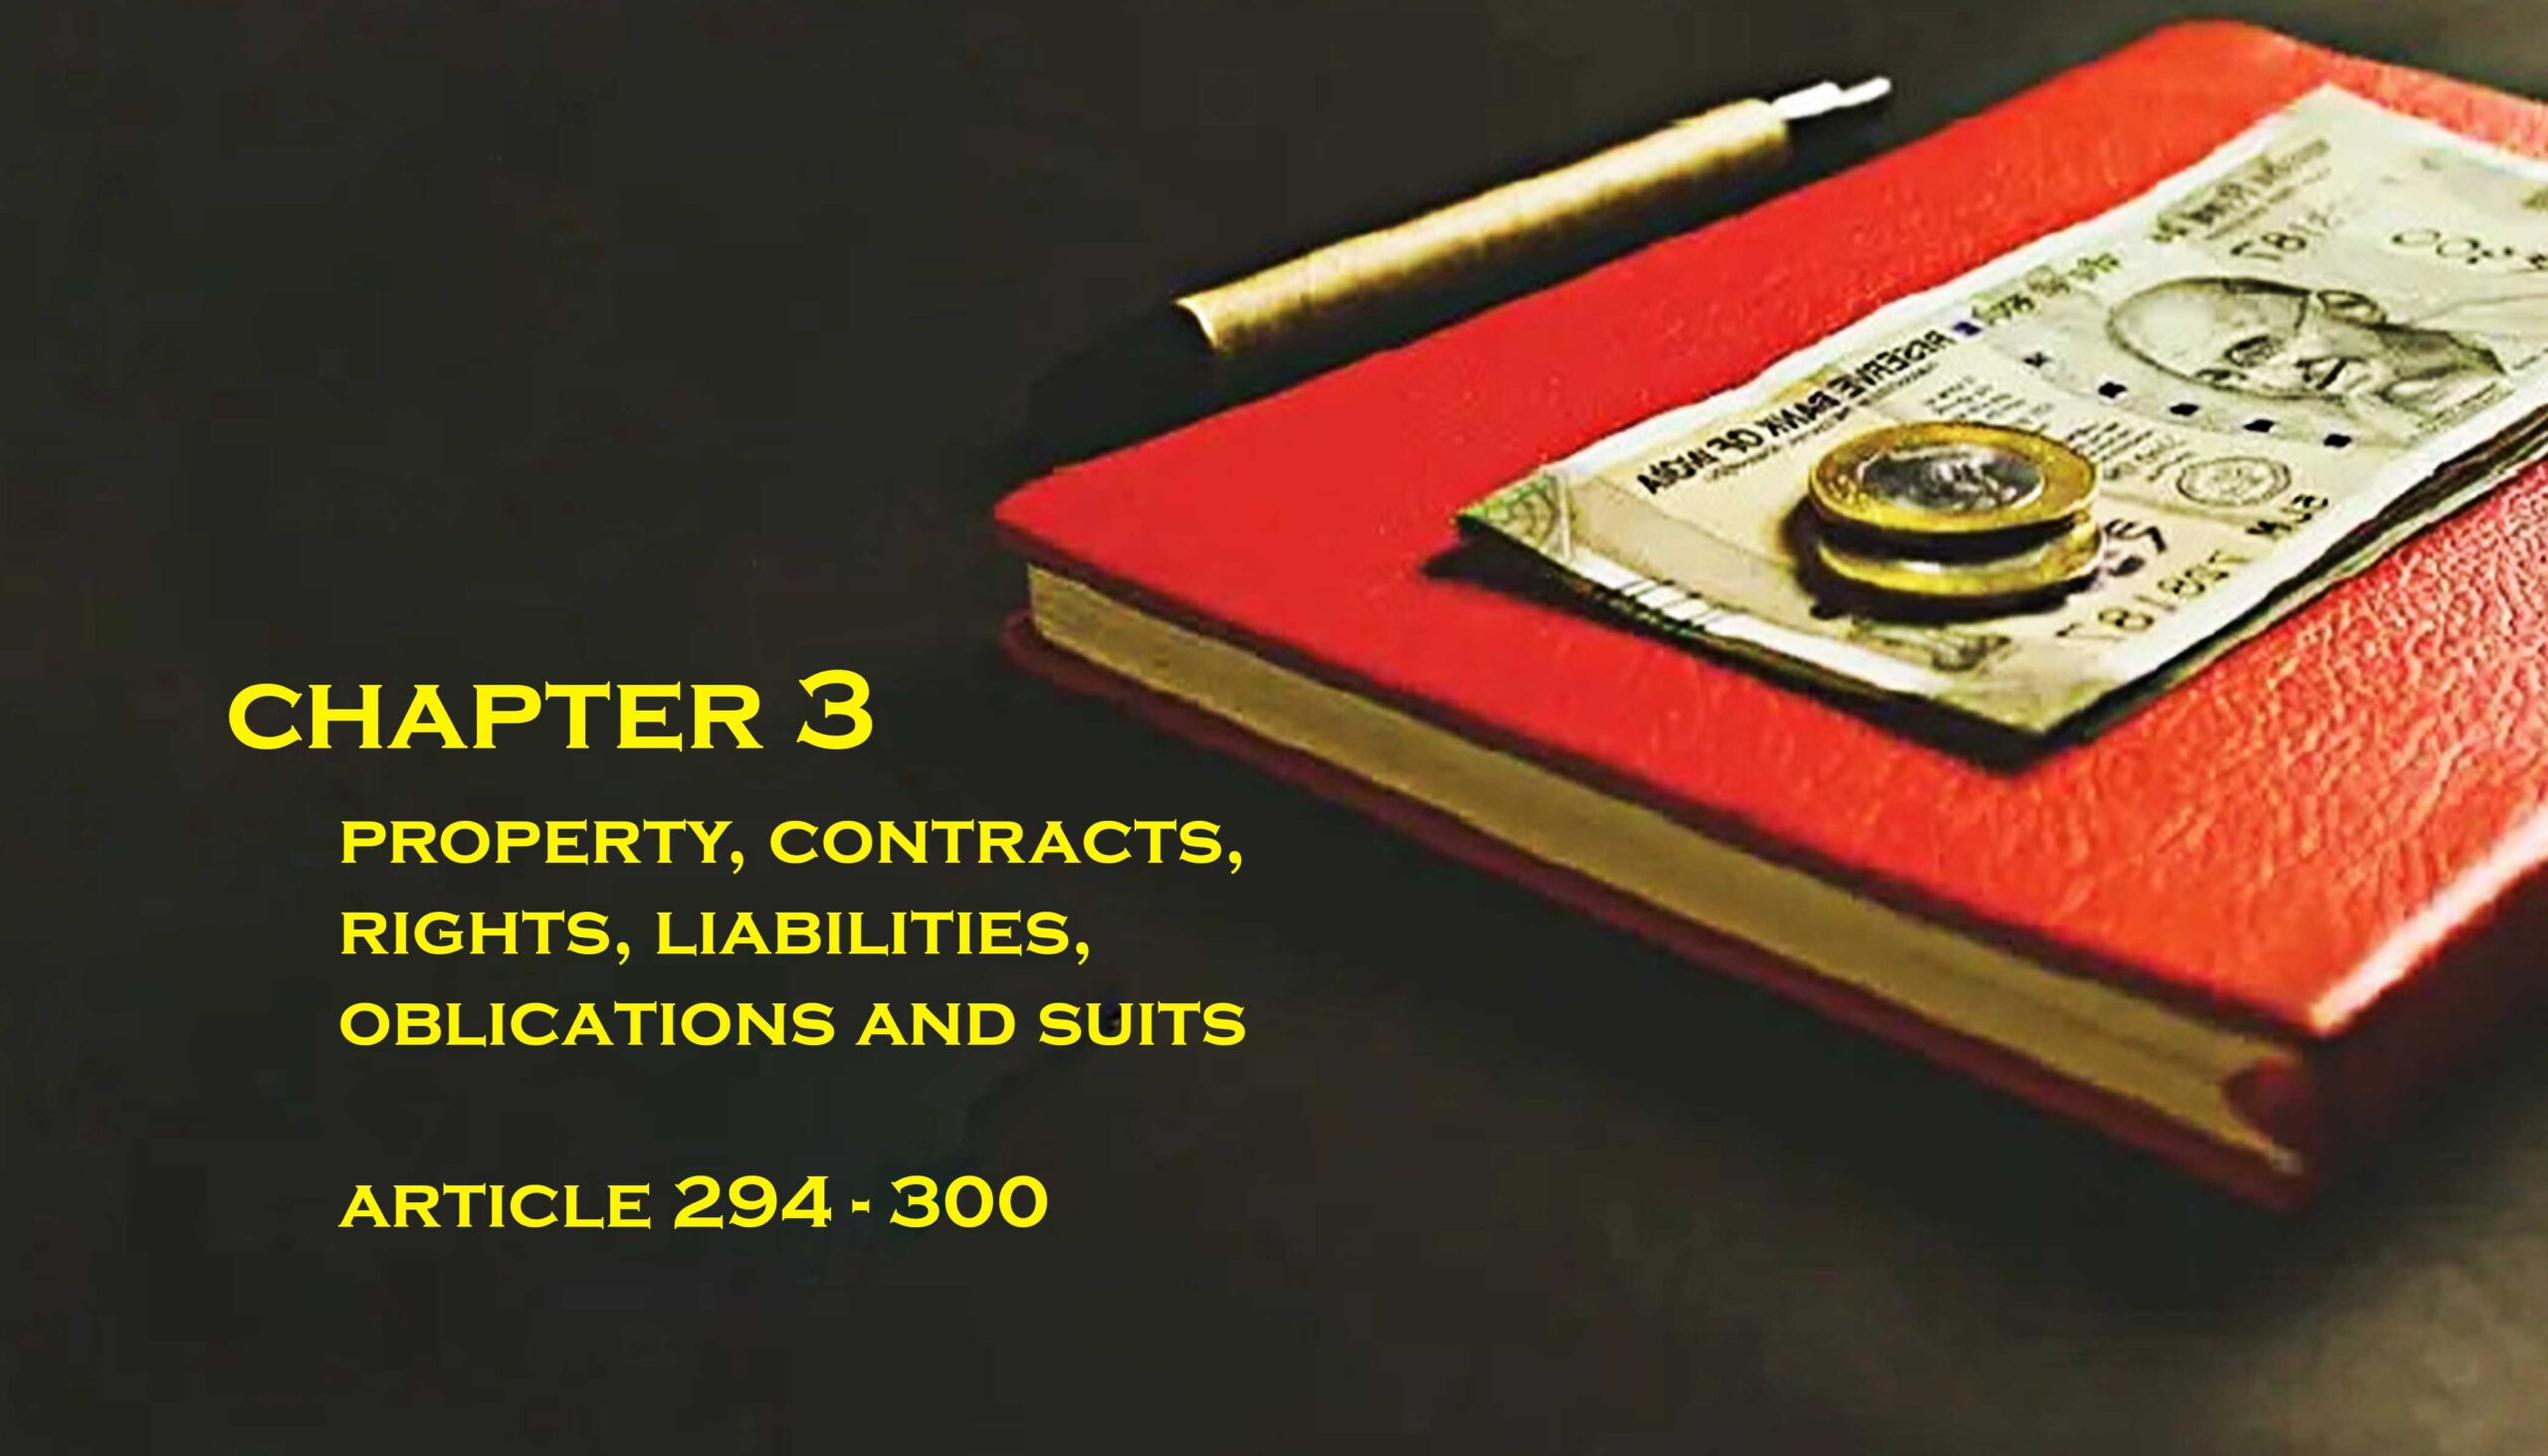 Chapter III – Property, Contracts, Rights, Liabilities, Obligations and Suits (Article 294 – 300)